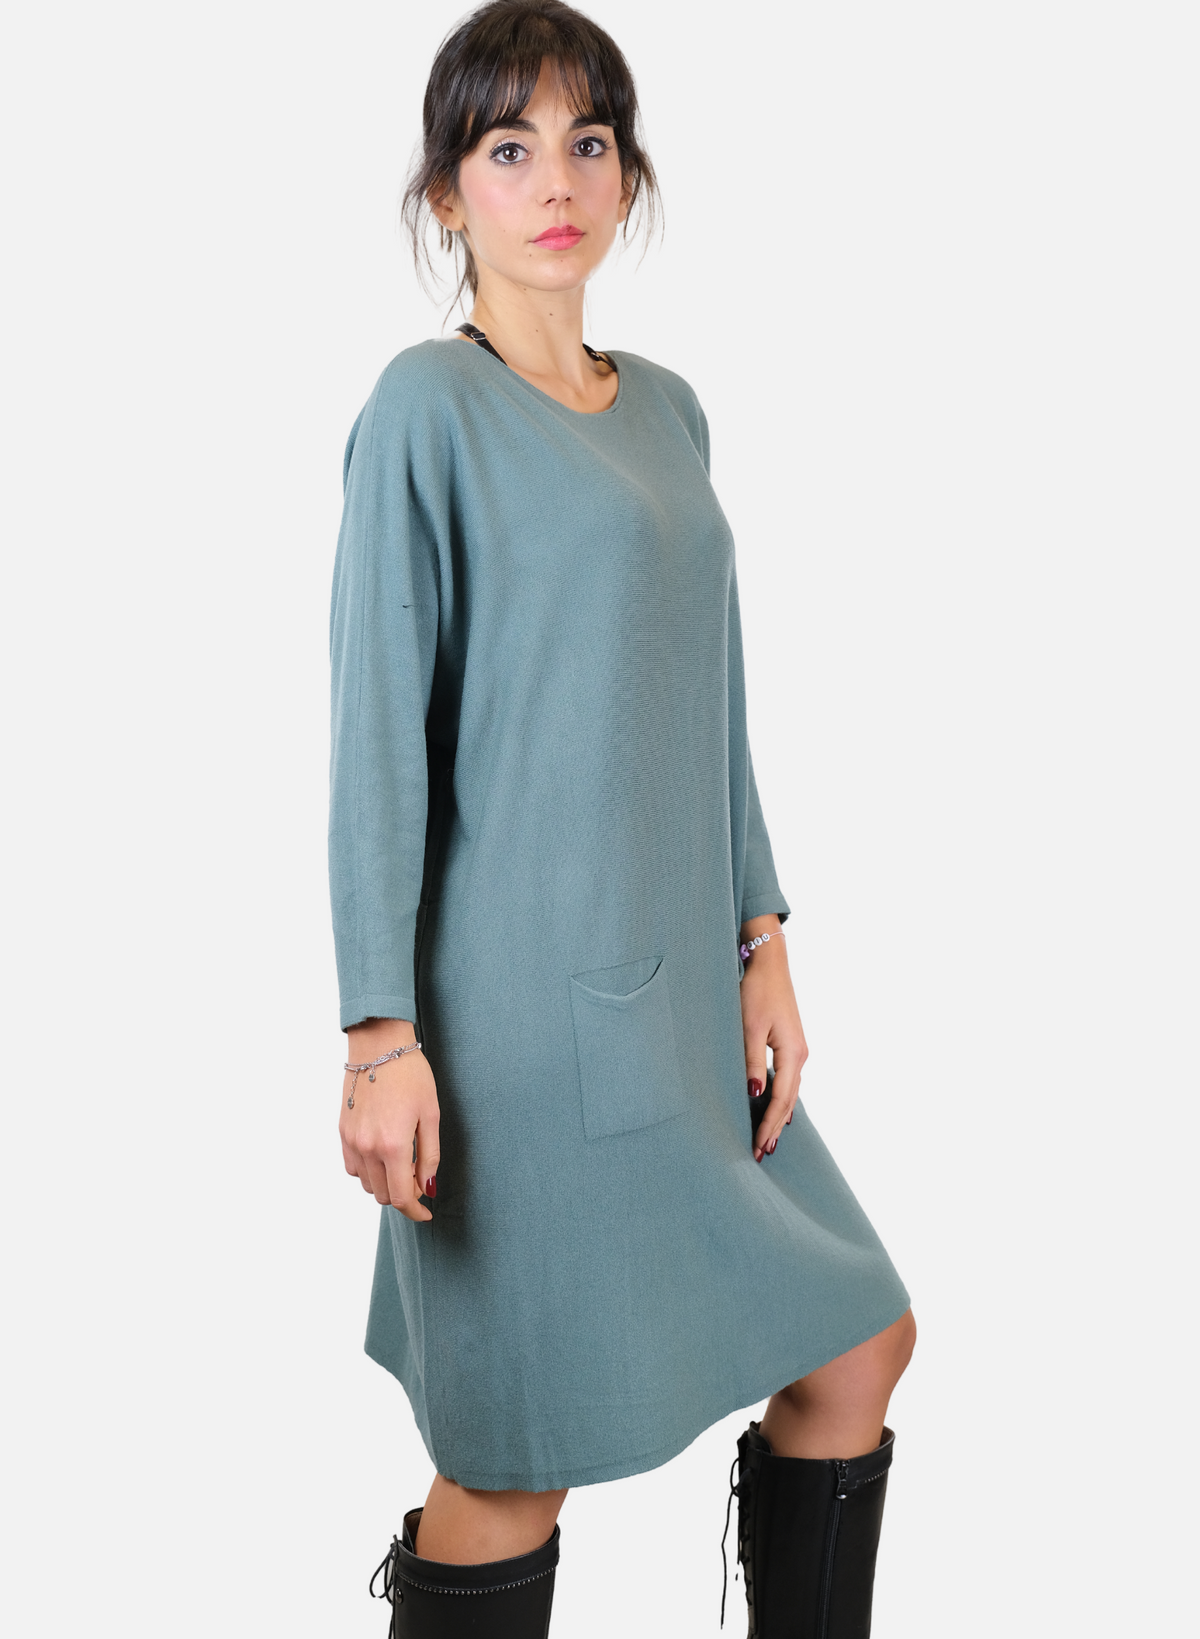 Maxi long -sleeved women's shirt with front pockets